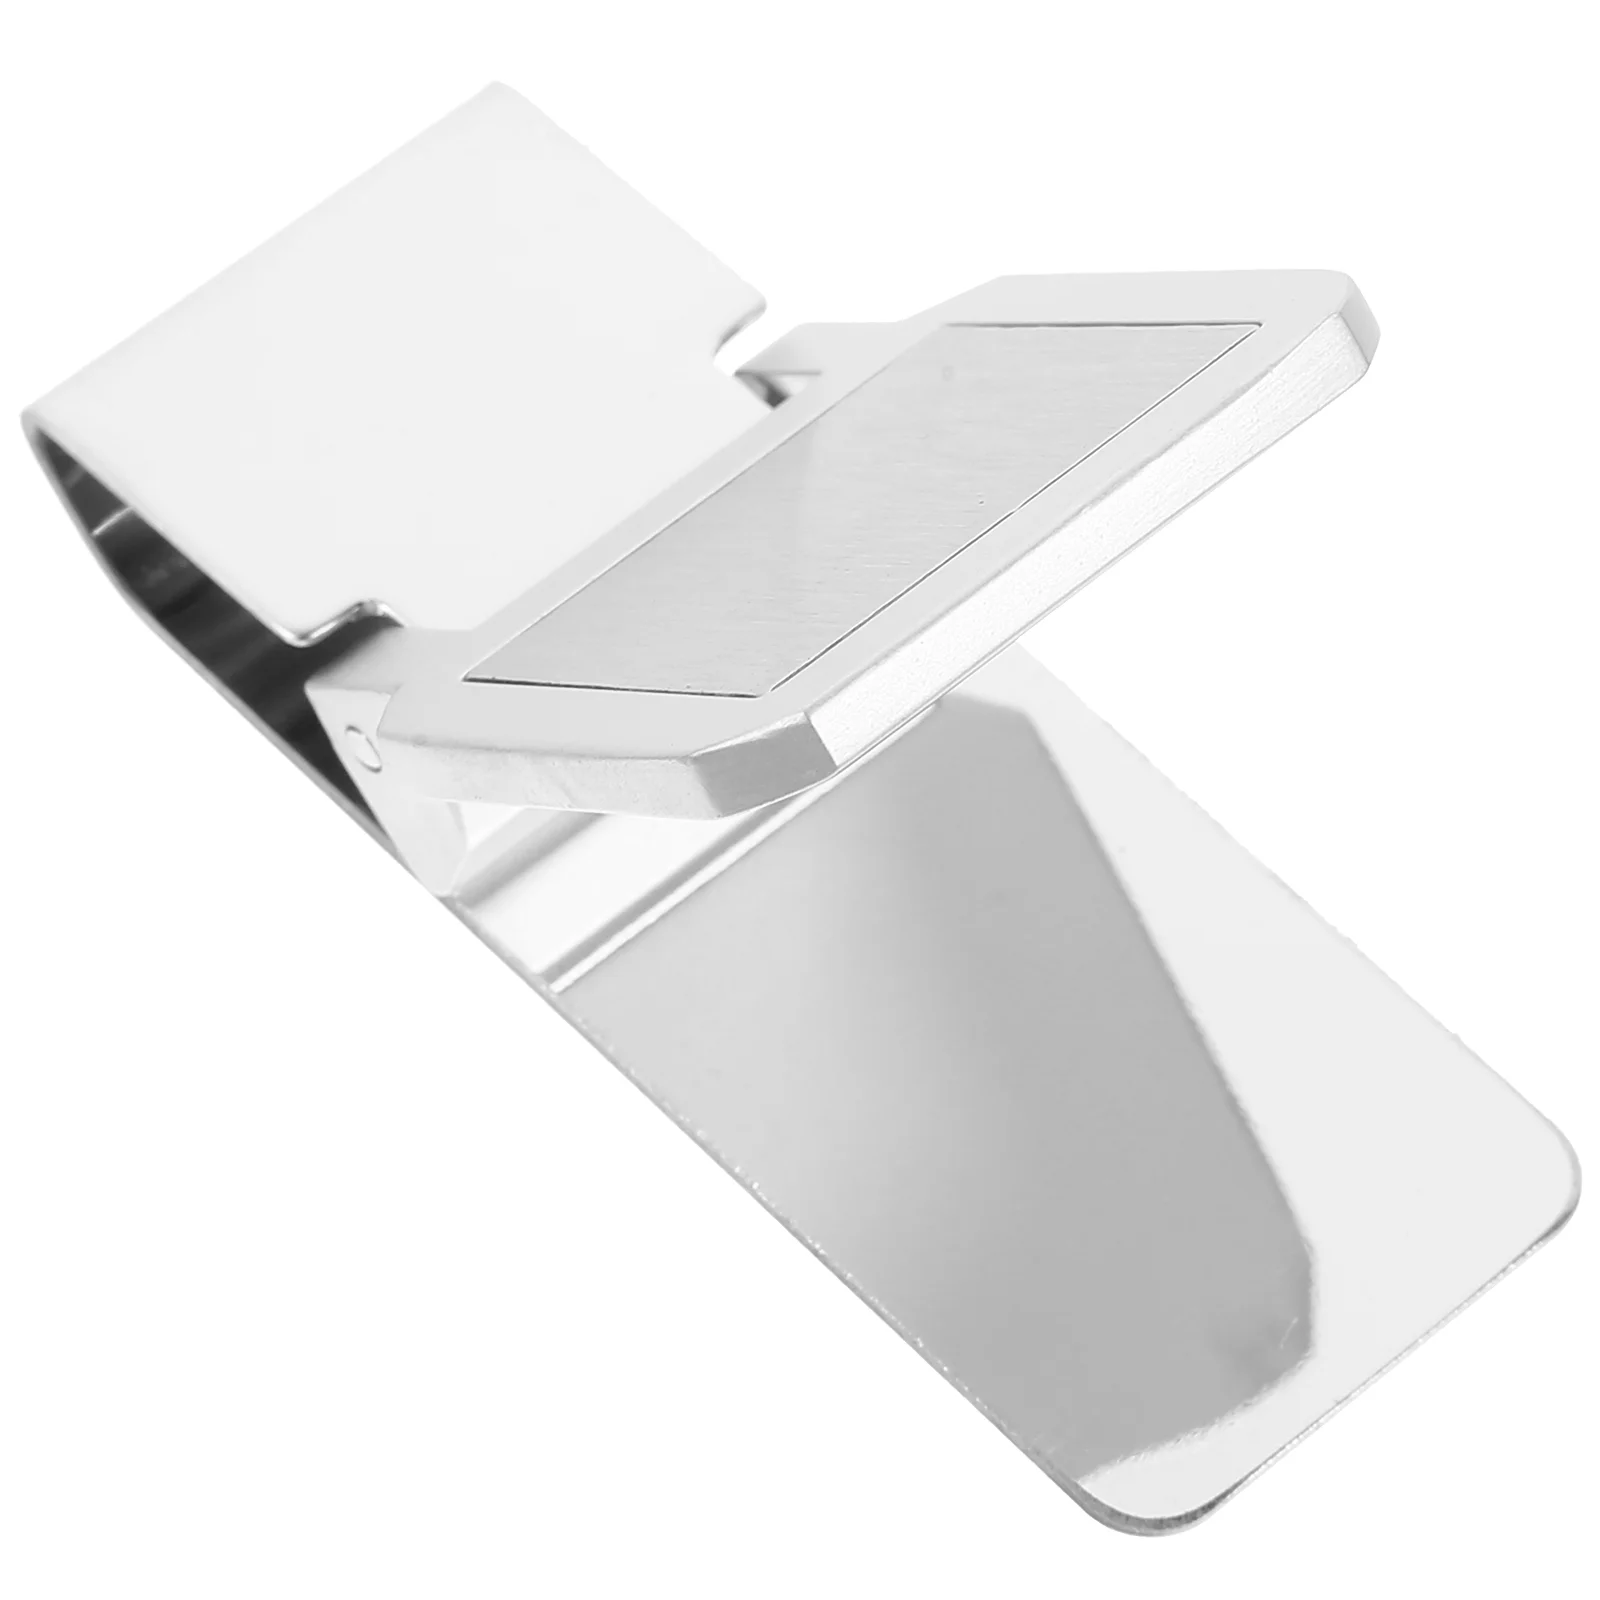 

Office Money Clip Practical Money Fixing Clamp Stainless Steel Bill Fold Fixing Clips Cheque Credit Cards Storage Clamps